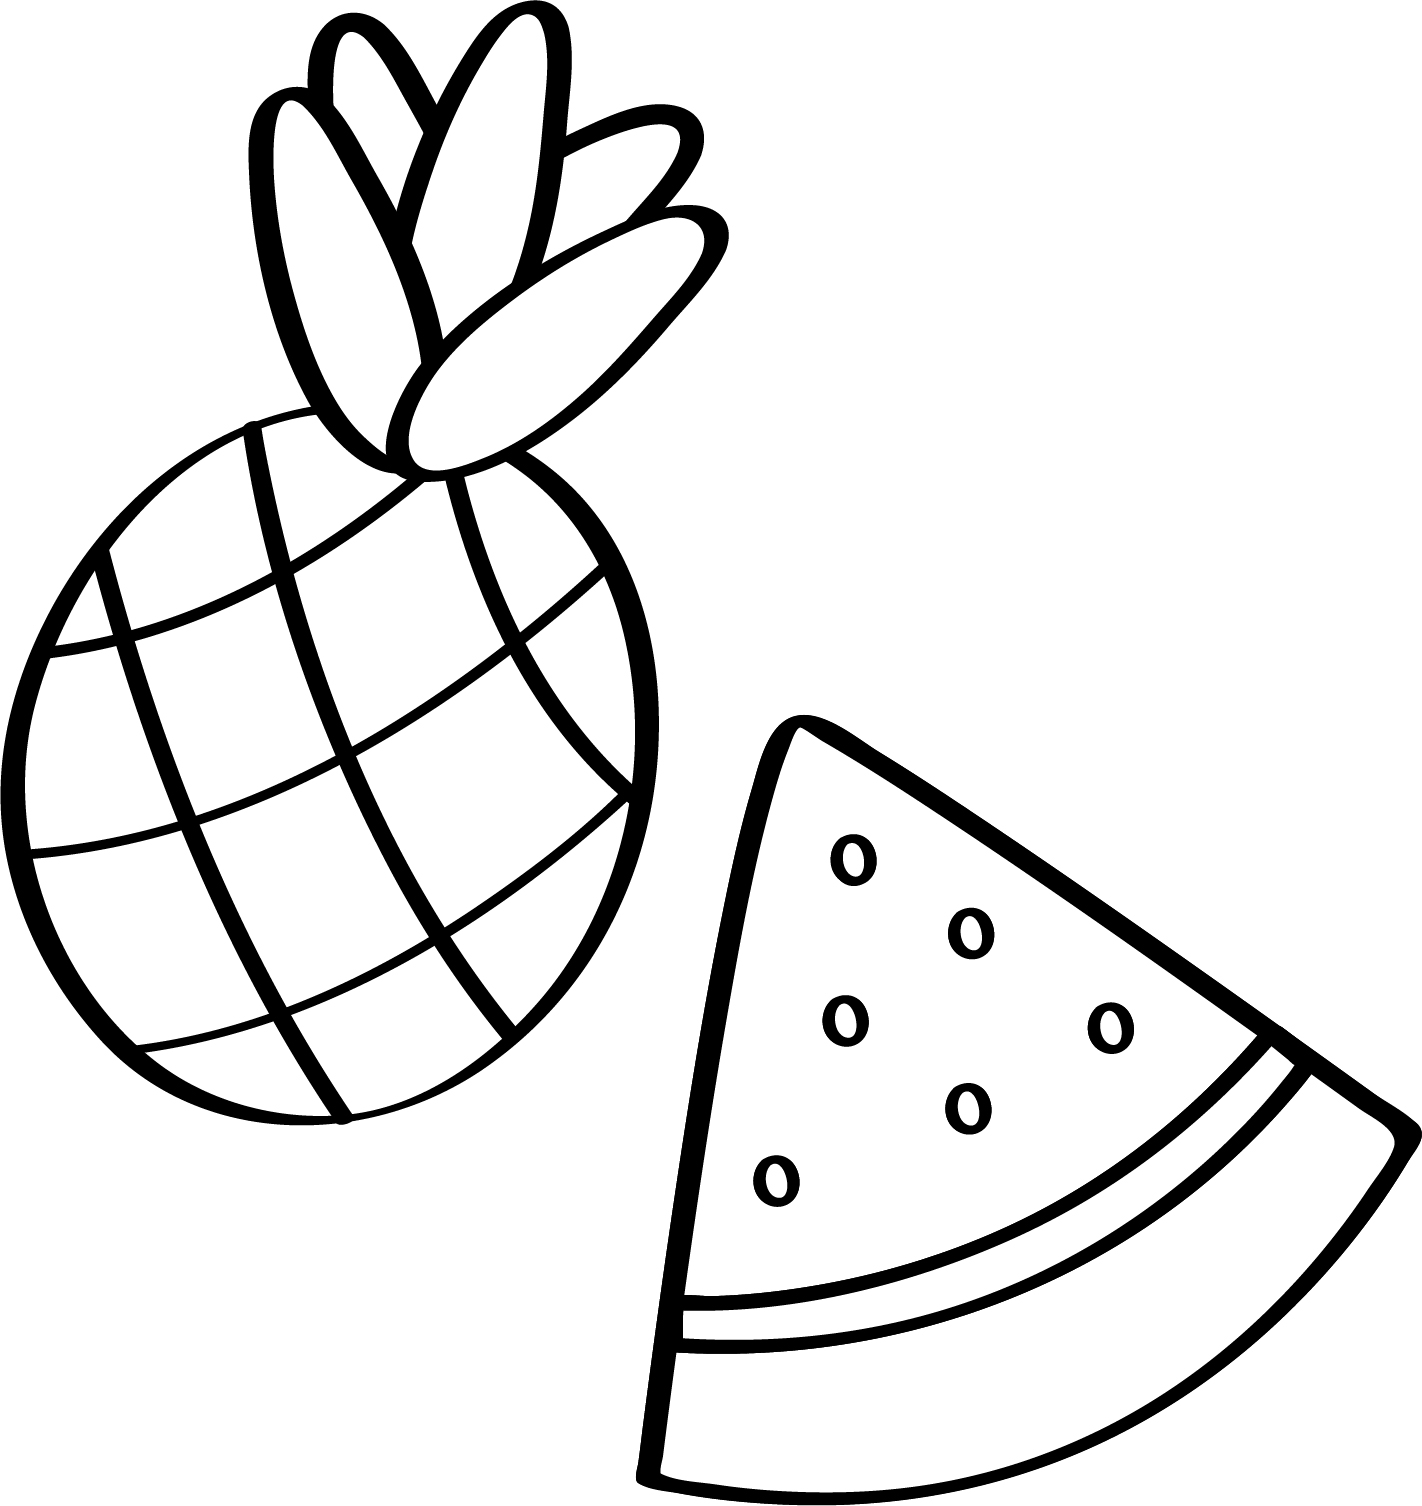 pineapple and watermelon coloring page